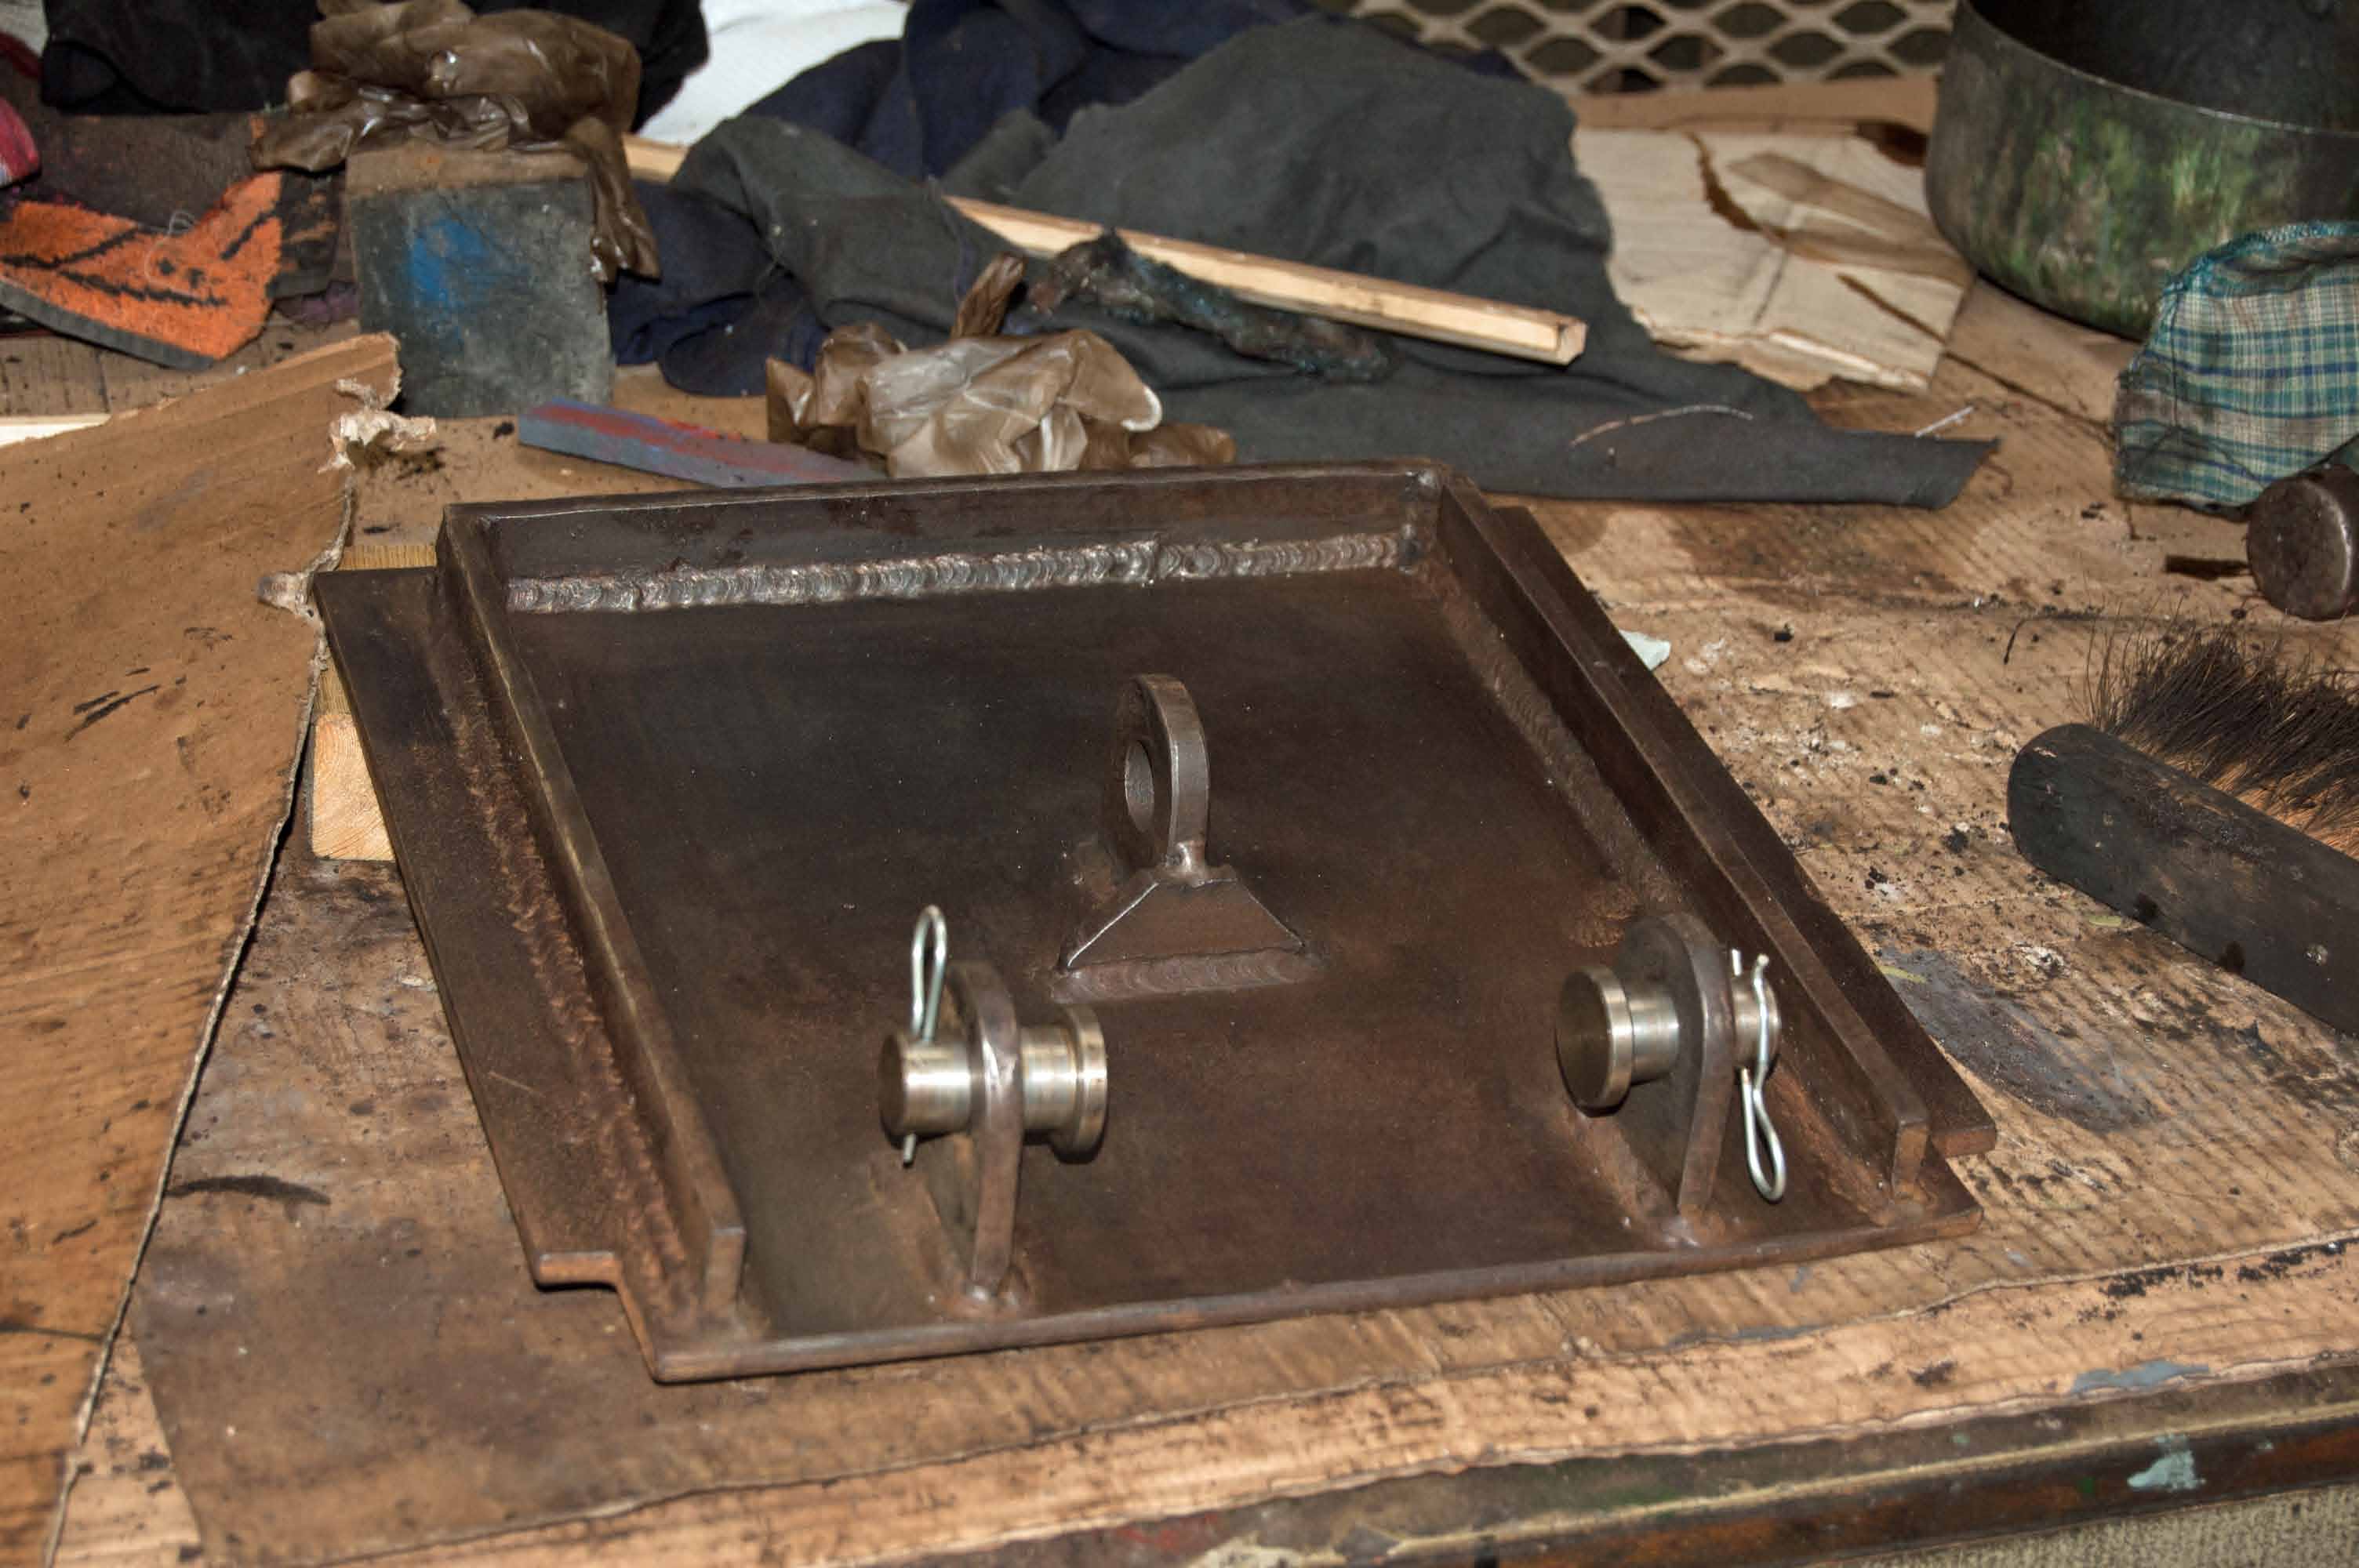 Every small part of the ashpans, including the damper and hopper door operating mechanisms, have to be cleaned before they can be painted. This is a damper door.